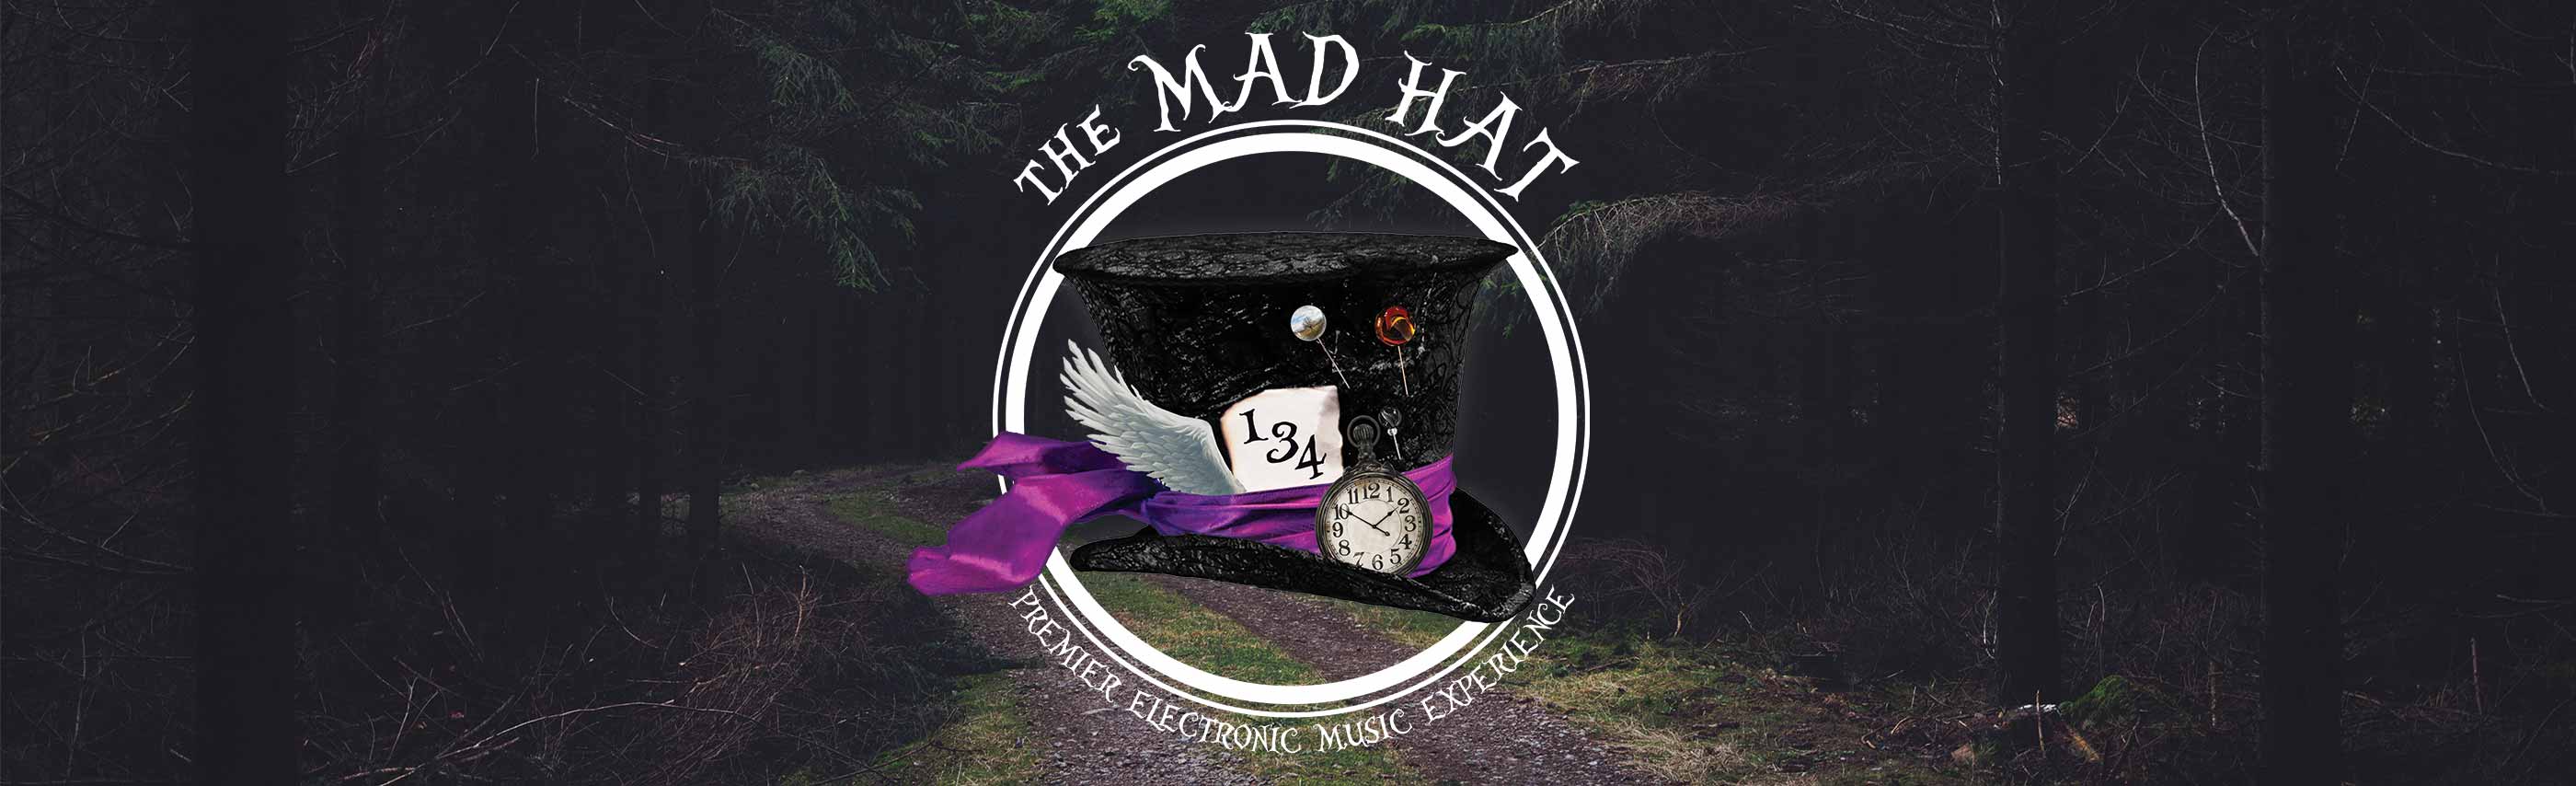 The Mad Hat